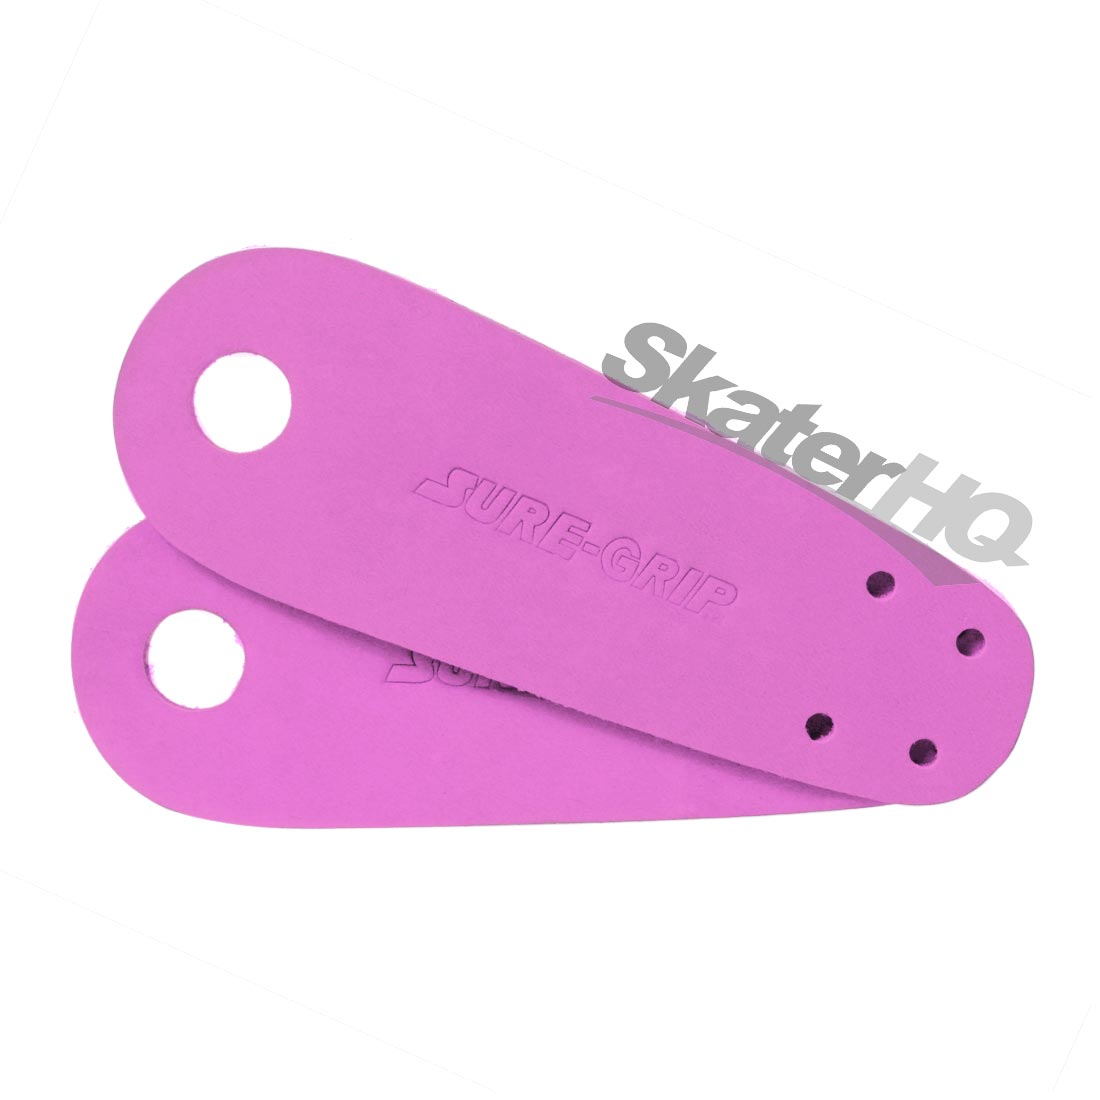 Sure-Grip Toe Guards - Pink Roller Skate Hardware and Parts